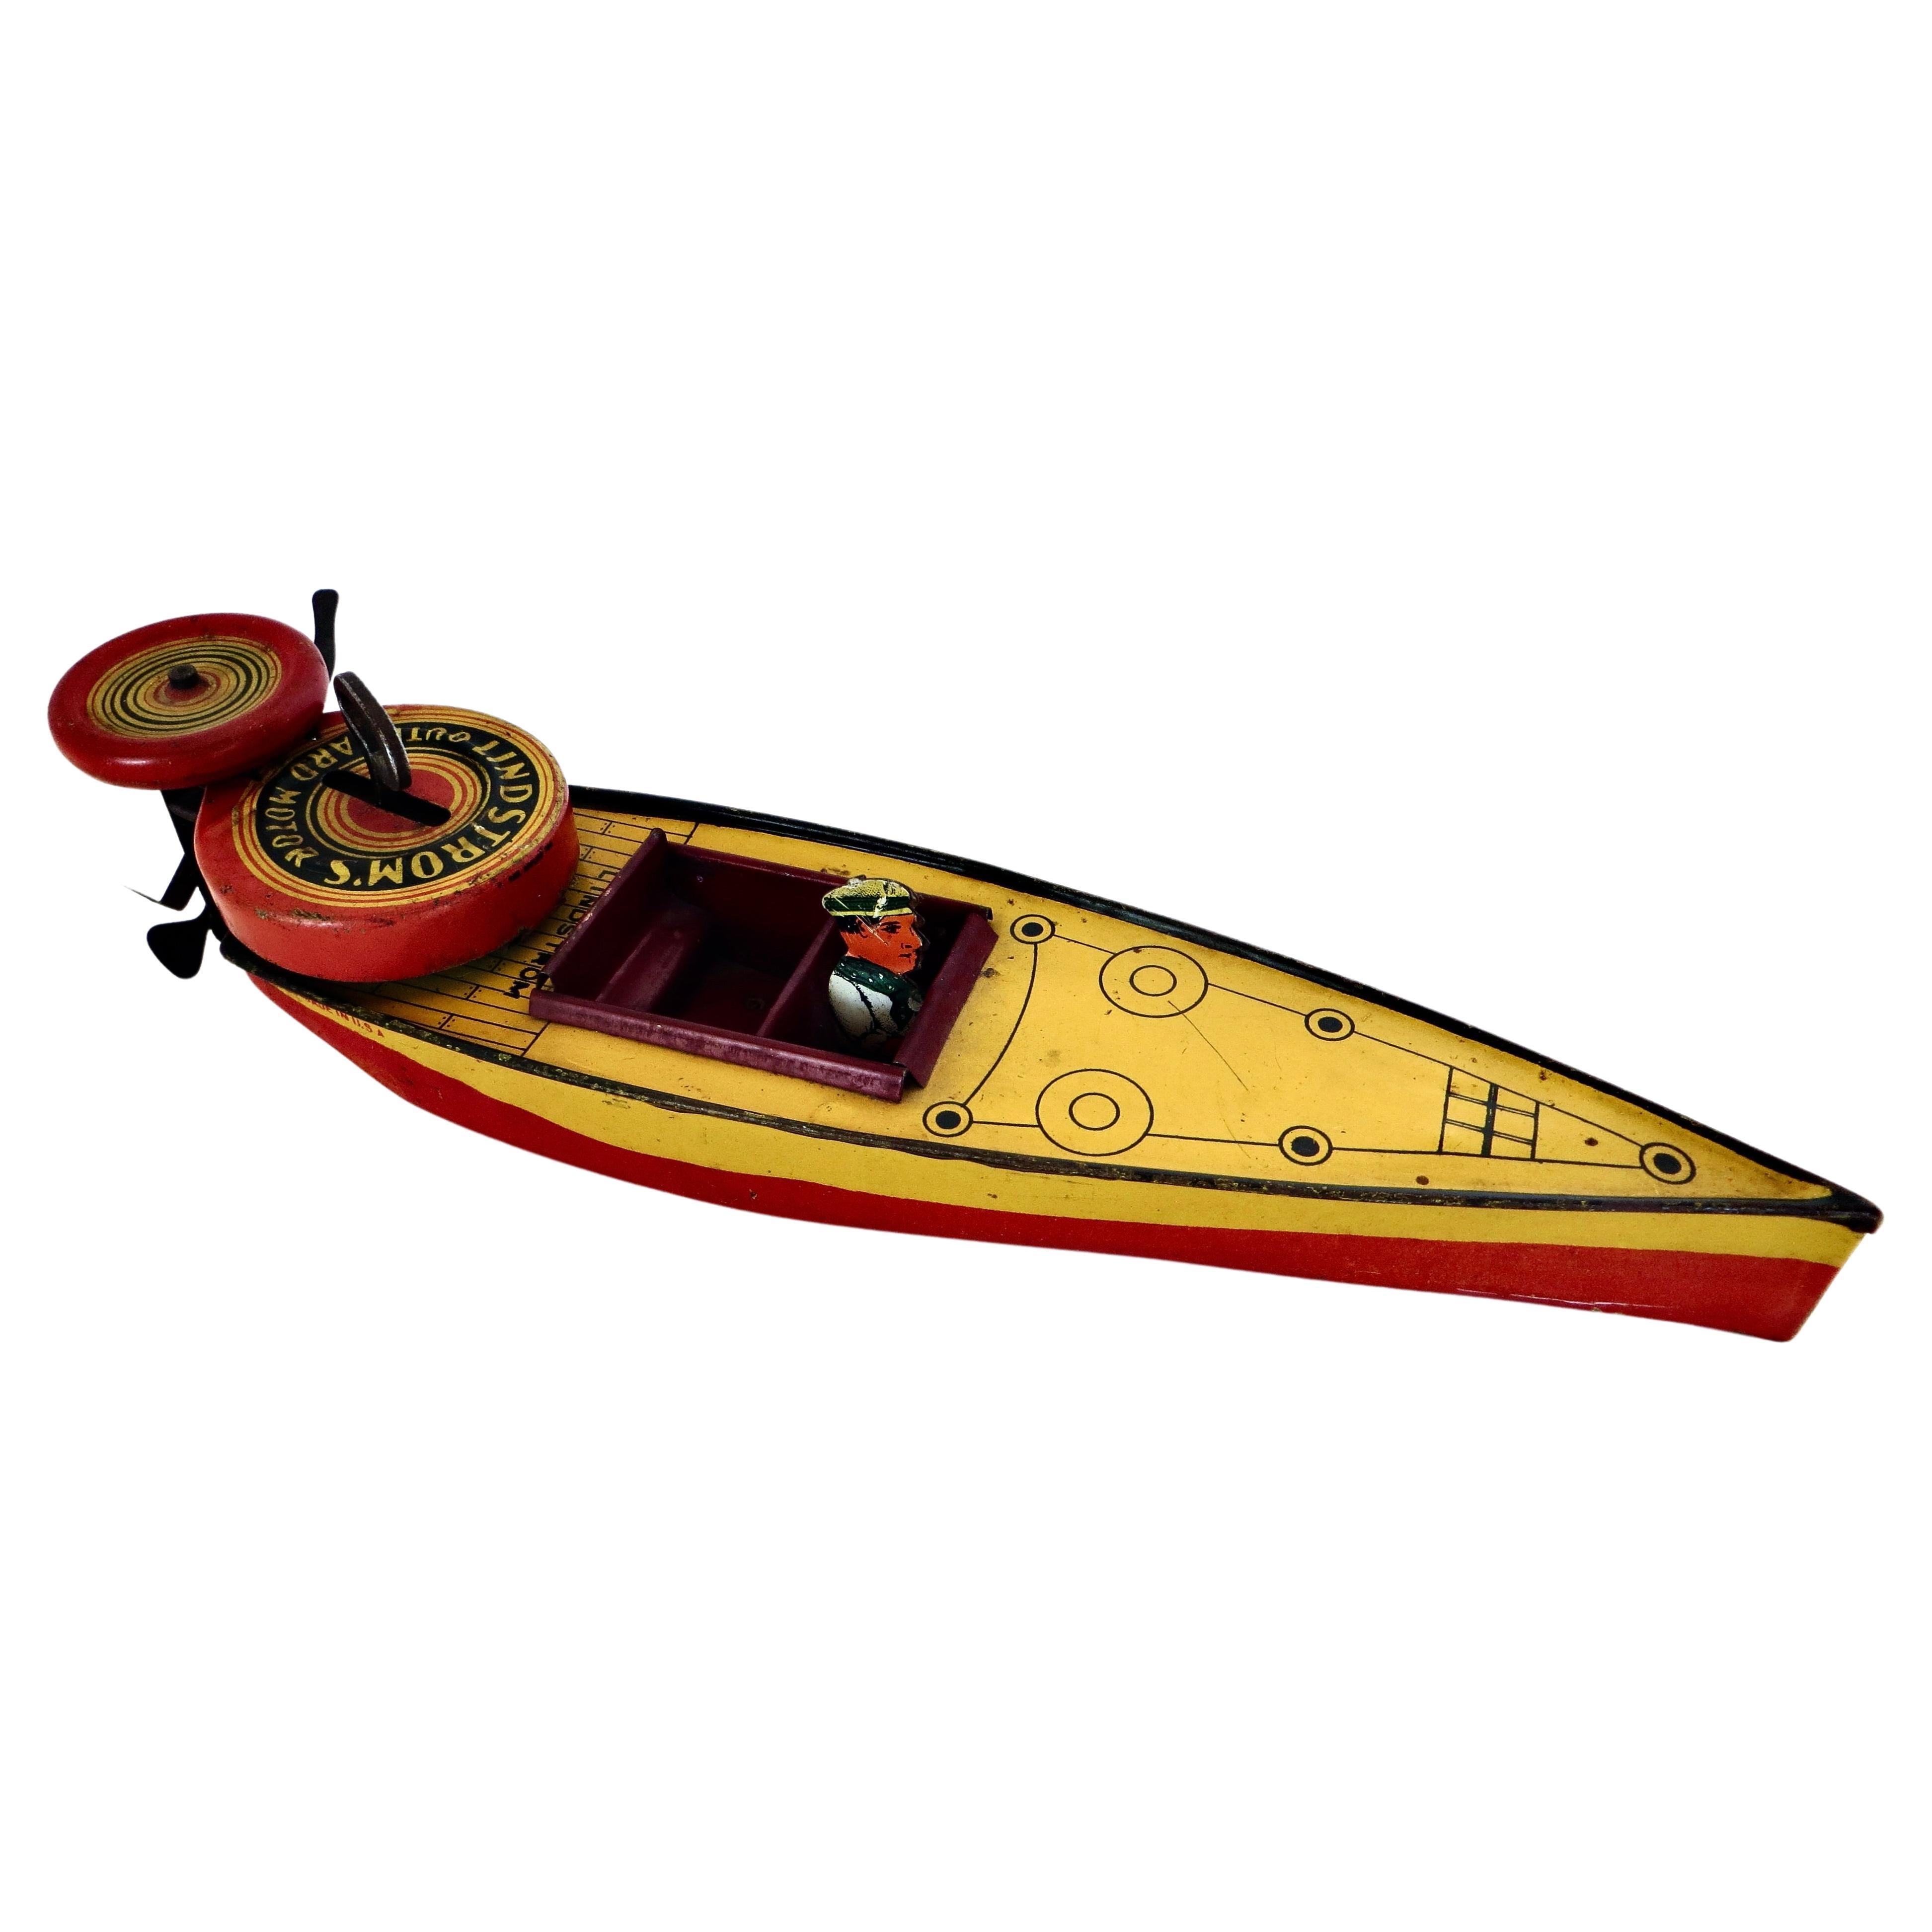 Vintage Toy Wind-Up Speed Boat with Driver by Lindstrom Toy Co., American 1933